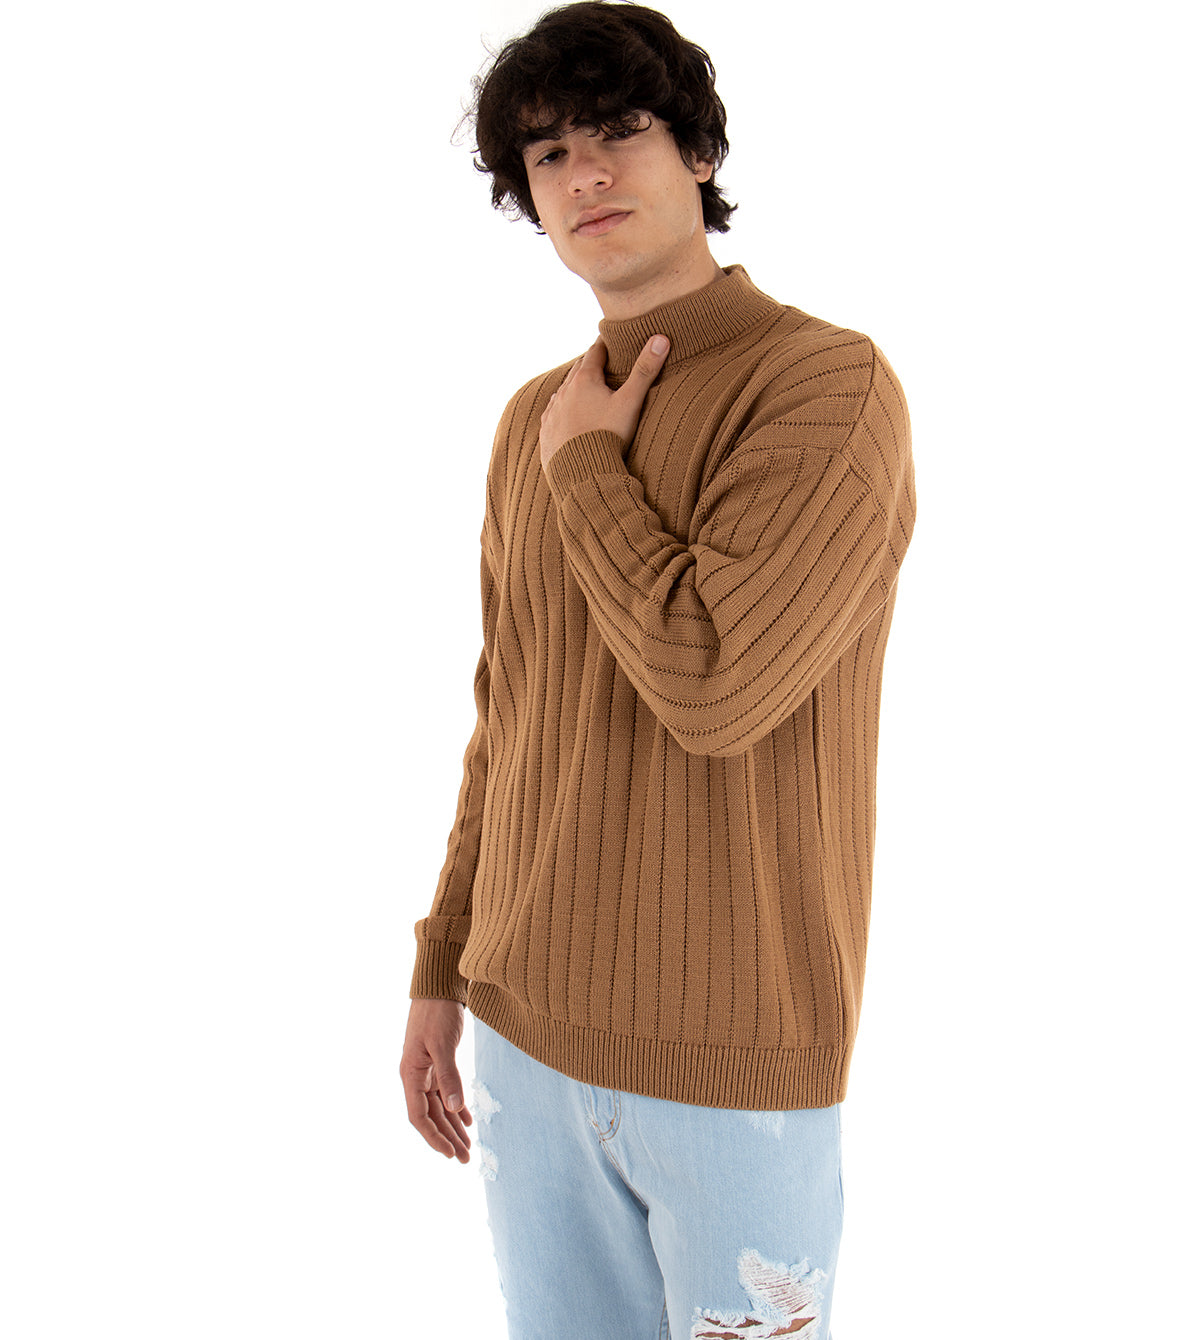 Men's Half-Neck Sweater Solid Color Camel Ribbed Striped Weave GIOSAL-M2170A